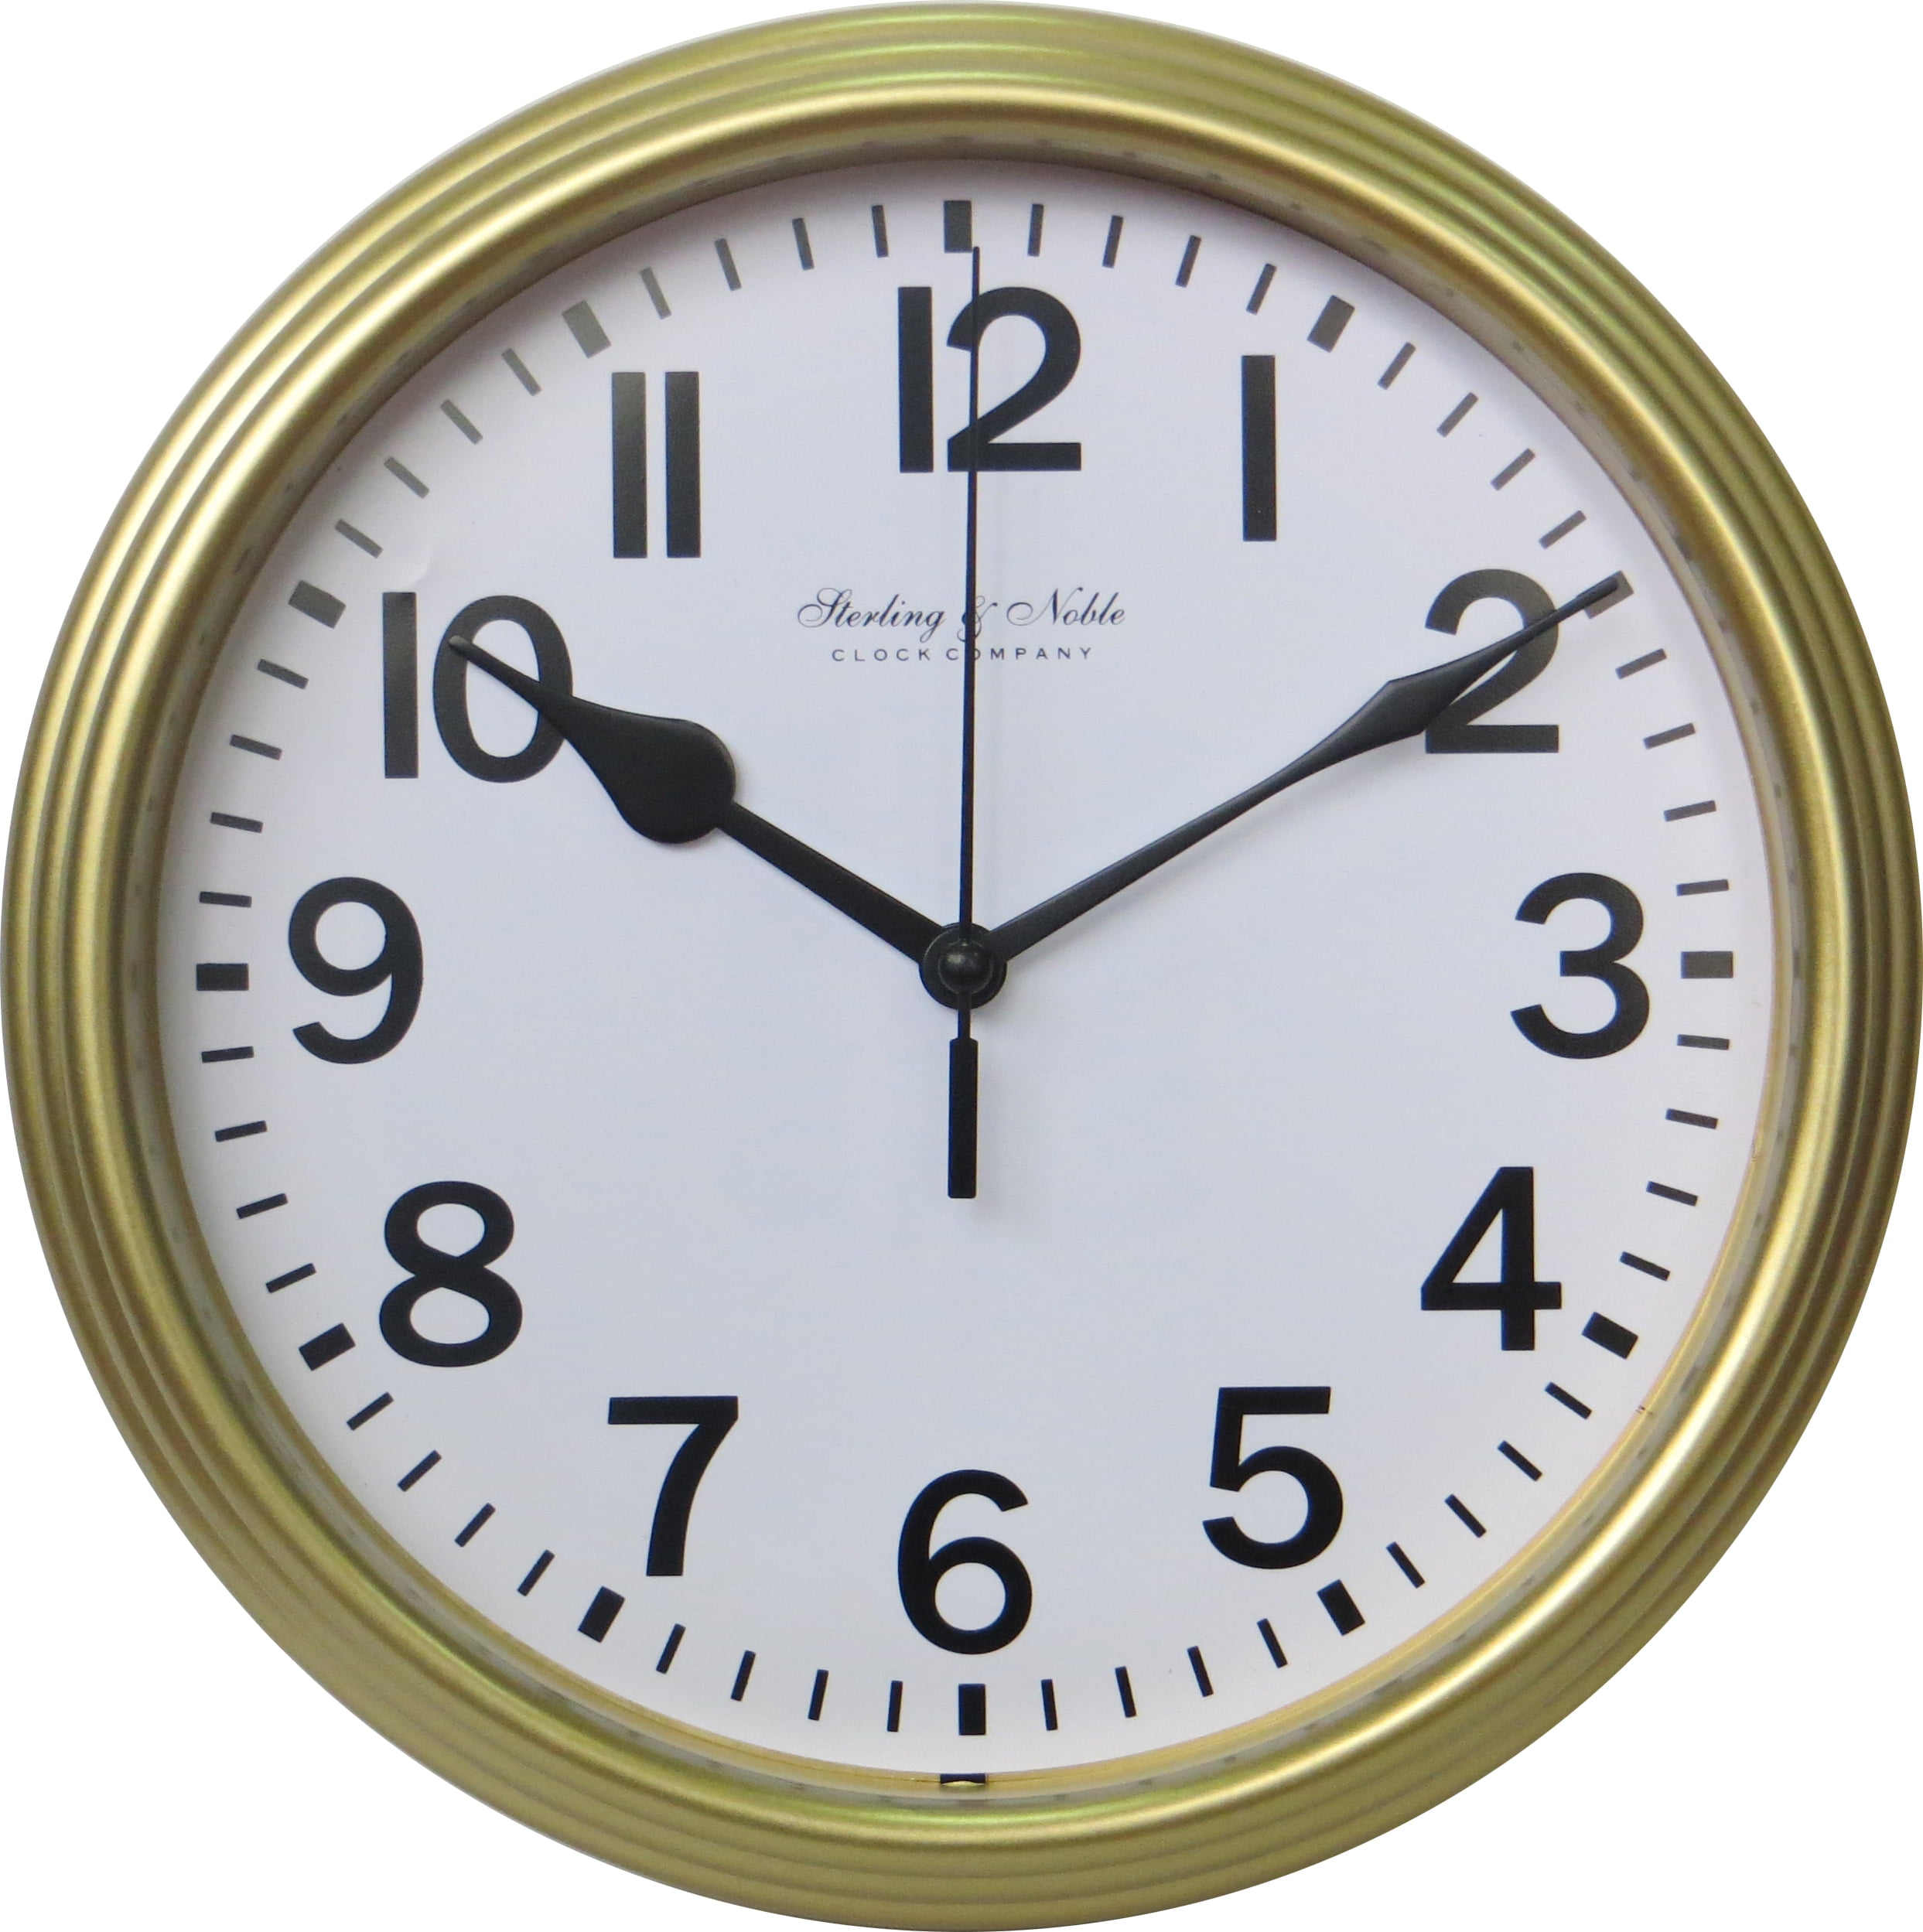 Mainstays Wall Clock 8.78 by 1.5 inches Gold F116 